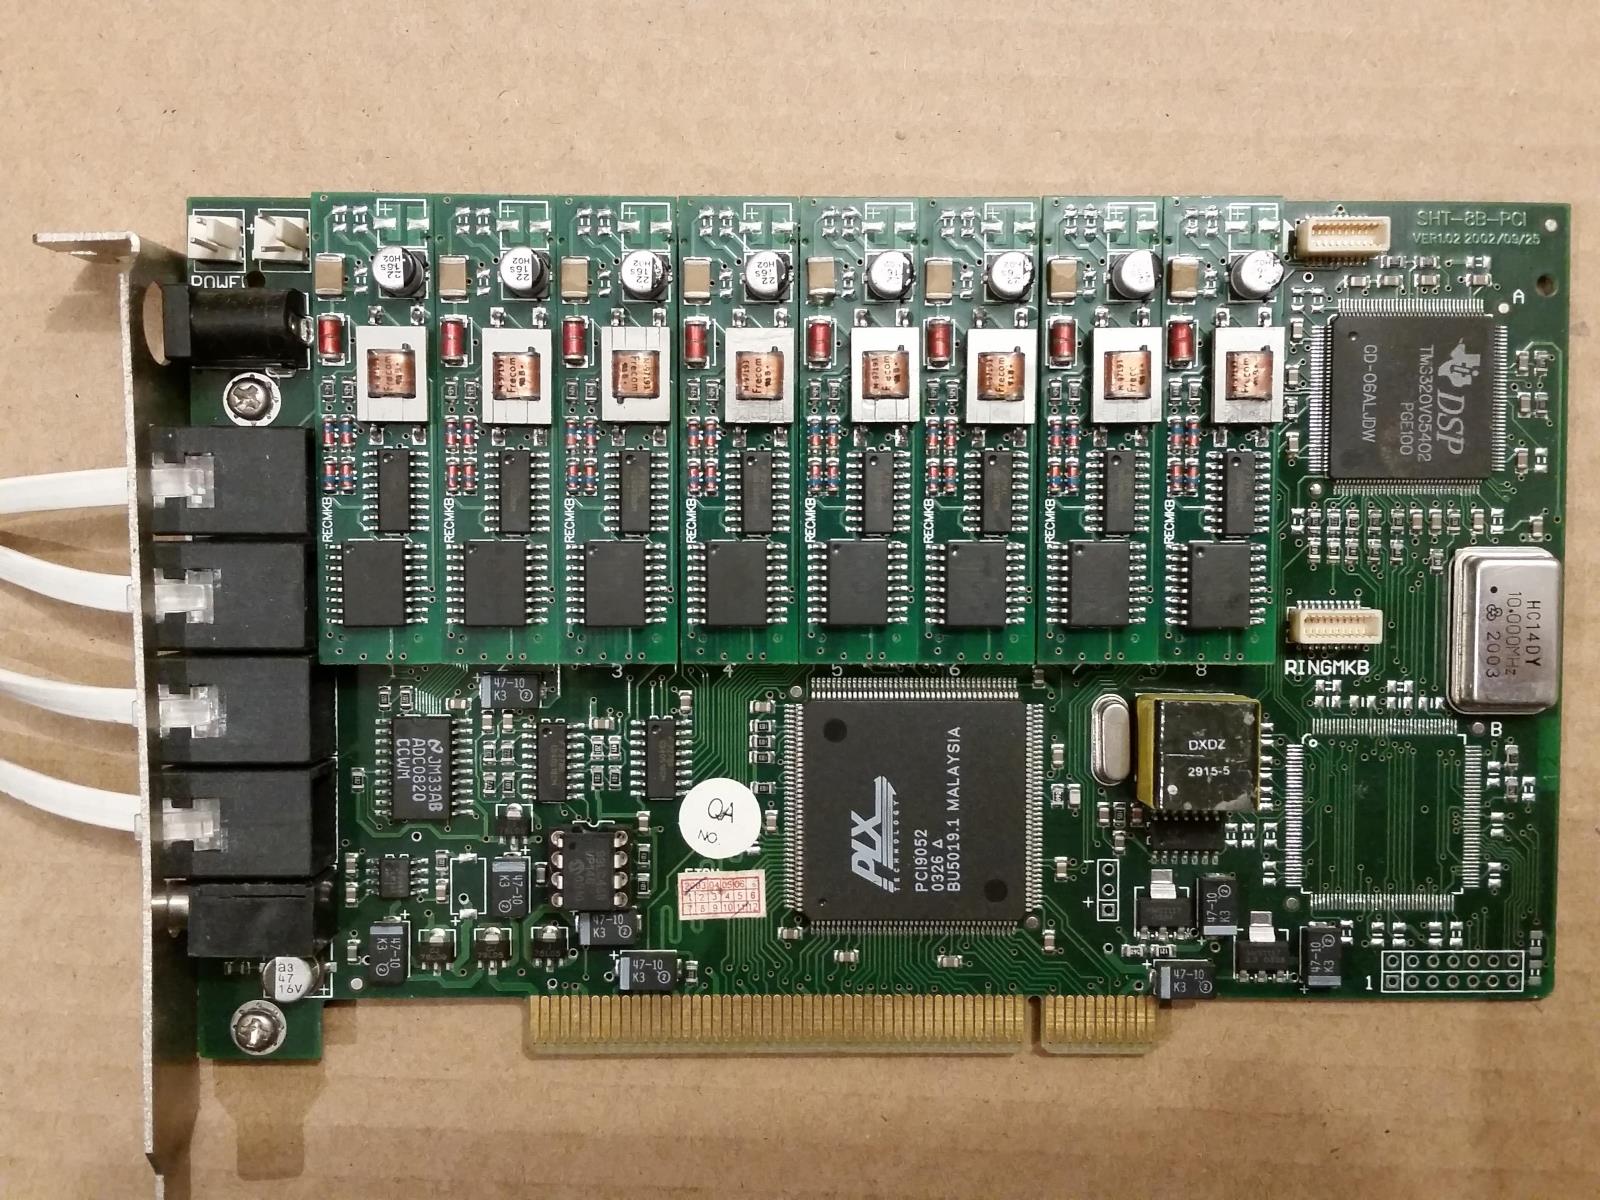 Details about  / SHT-8B//PCI voice card with 4 recording modules 8-channel recording card sound PC